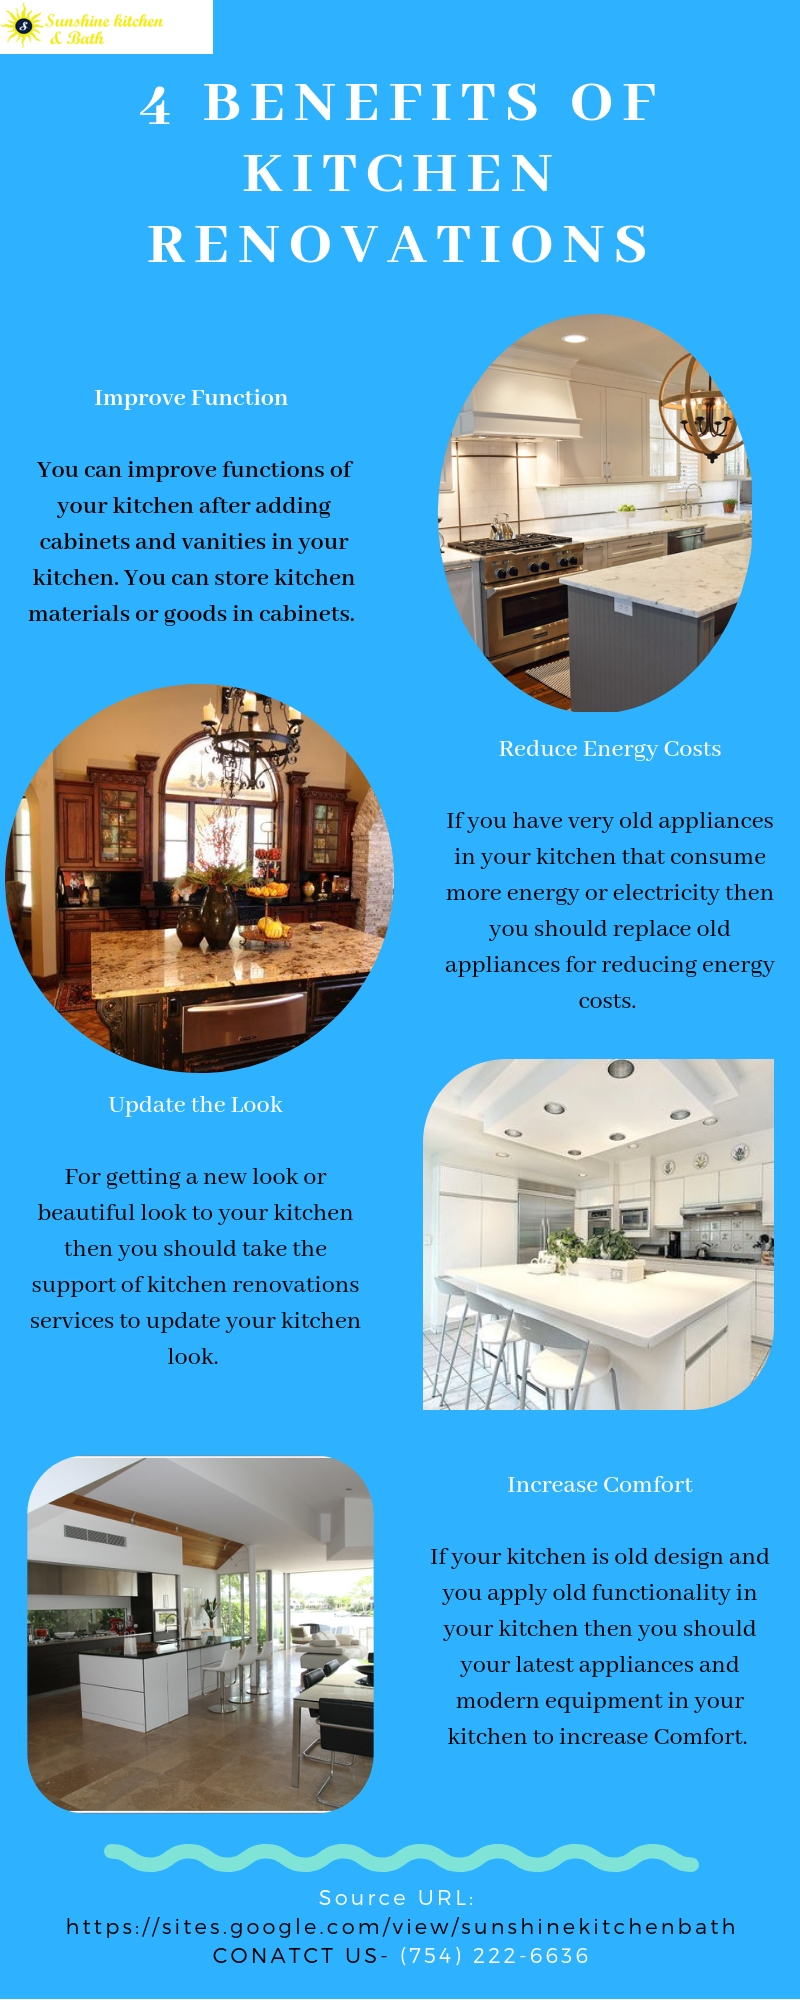 Benefits of Kitchen Renovations Services